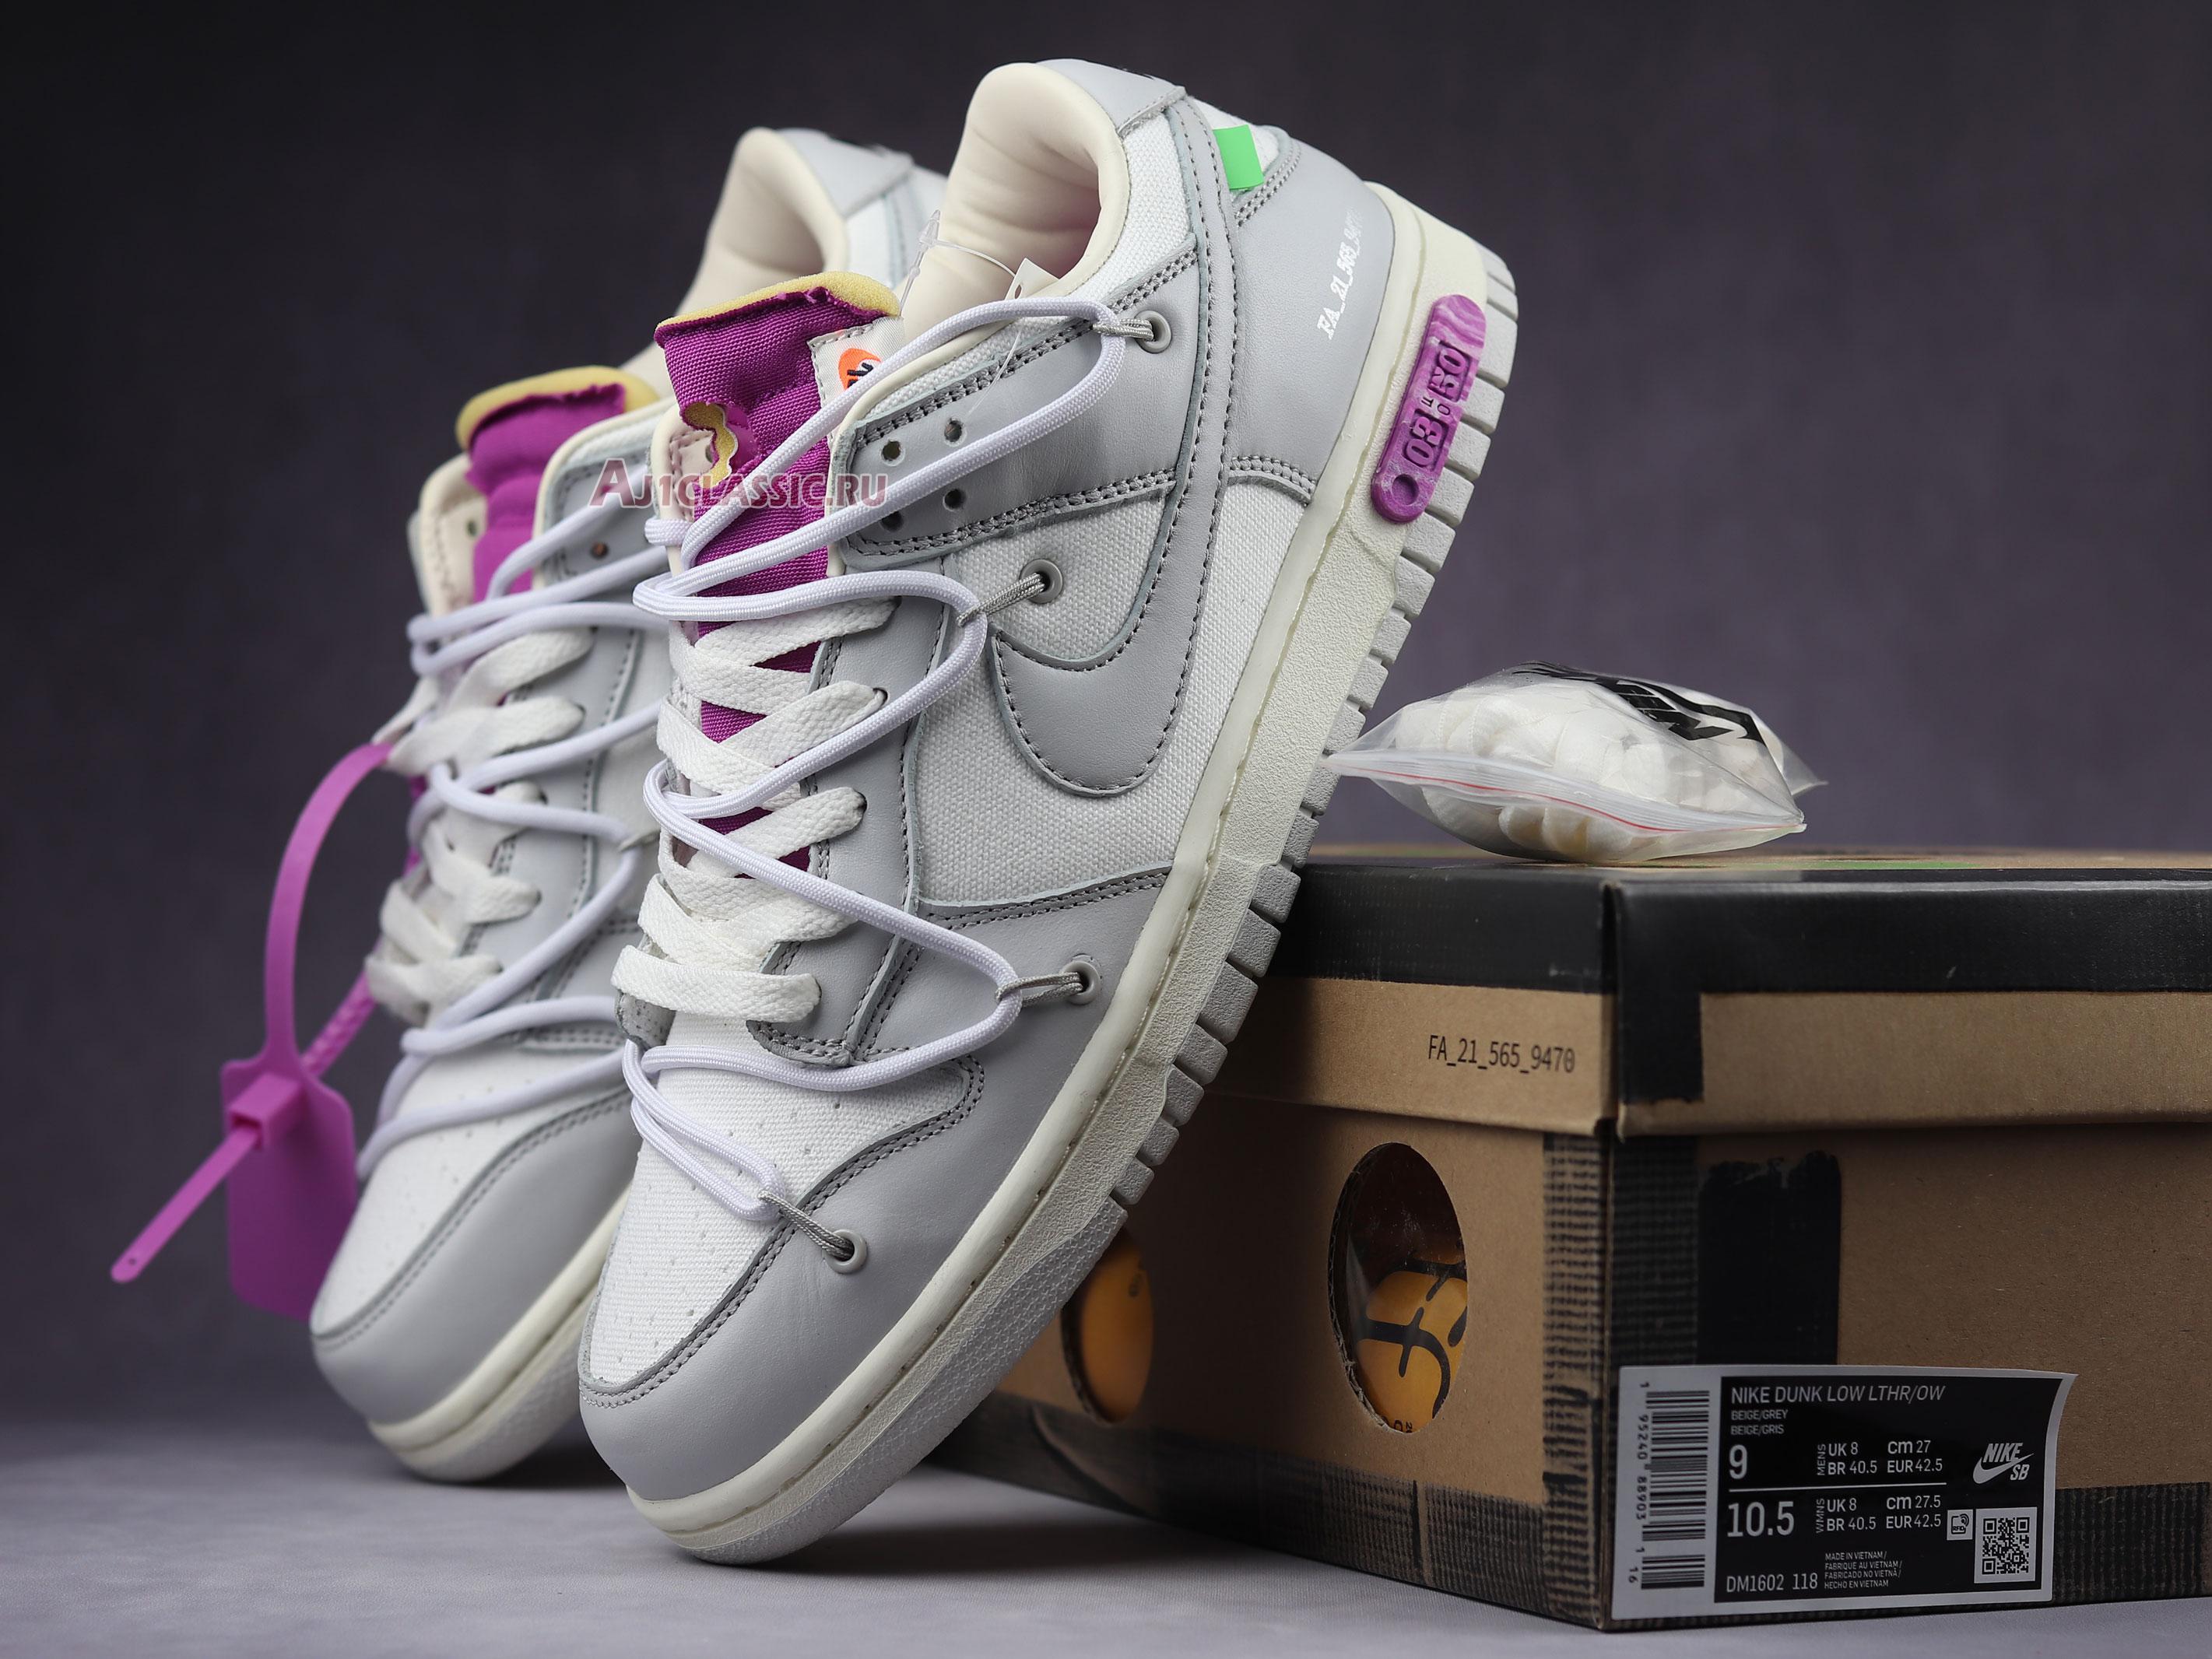 Off-White x Nike Dunk Low Lot 03 of 50 DM1602-111 Sail/Neutral Grey/White-Purple Sneakers